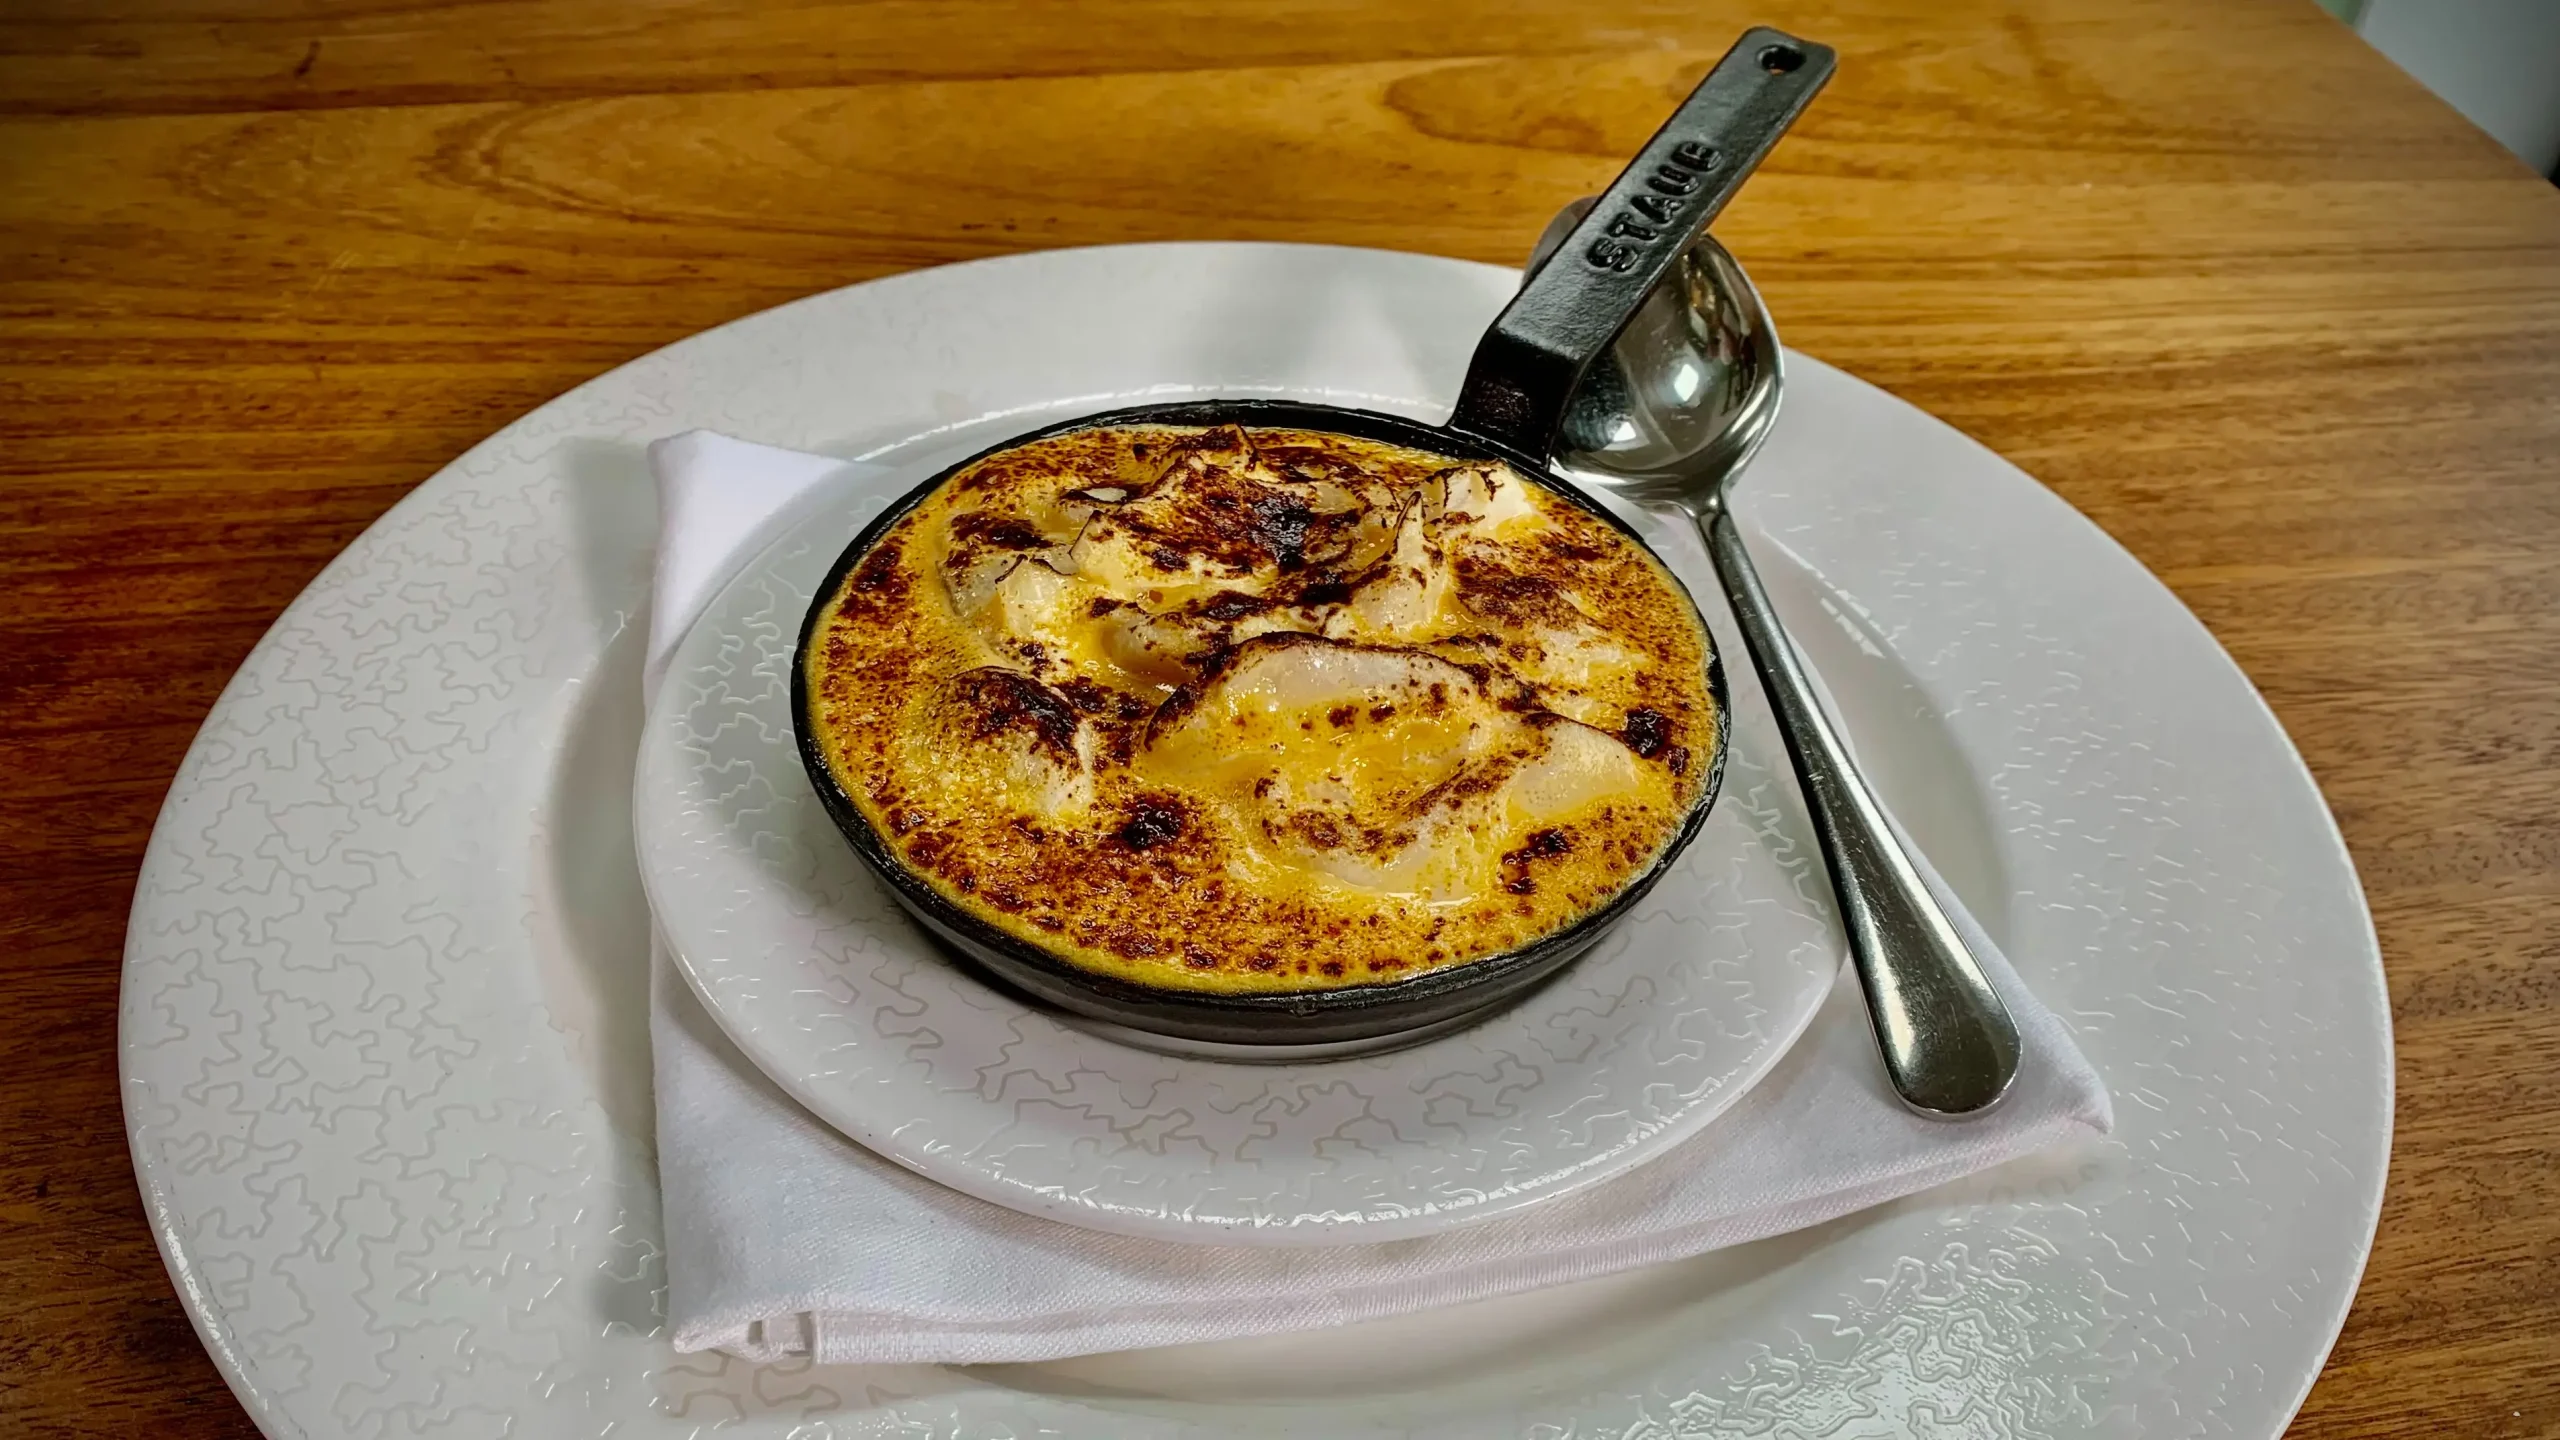 smoked haddock omelette - What is an omelette Arnold Bennett